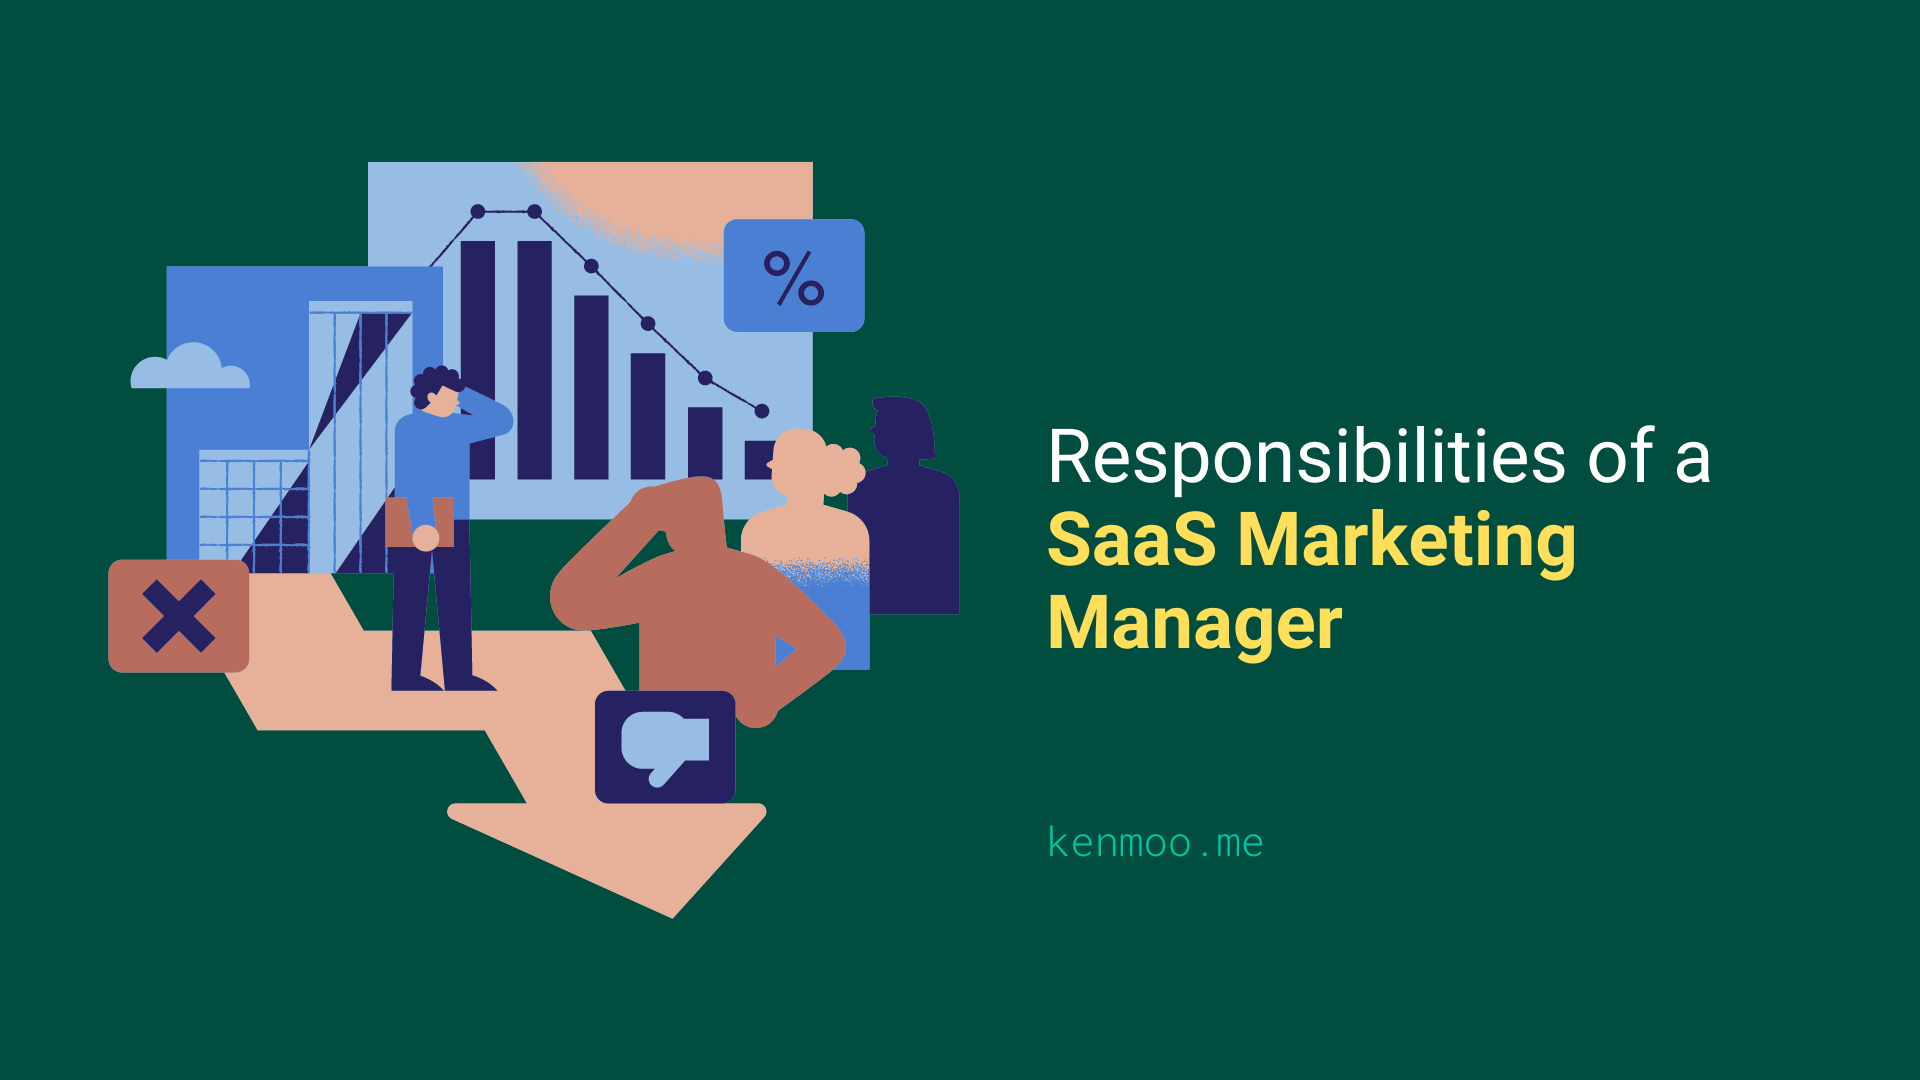 Responsibilities of a SaaS Marketing Manager